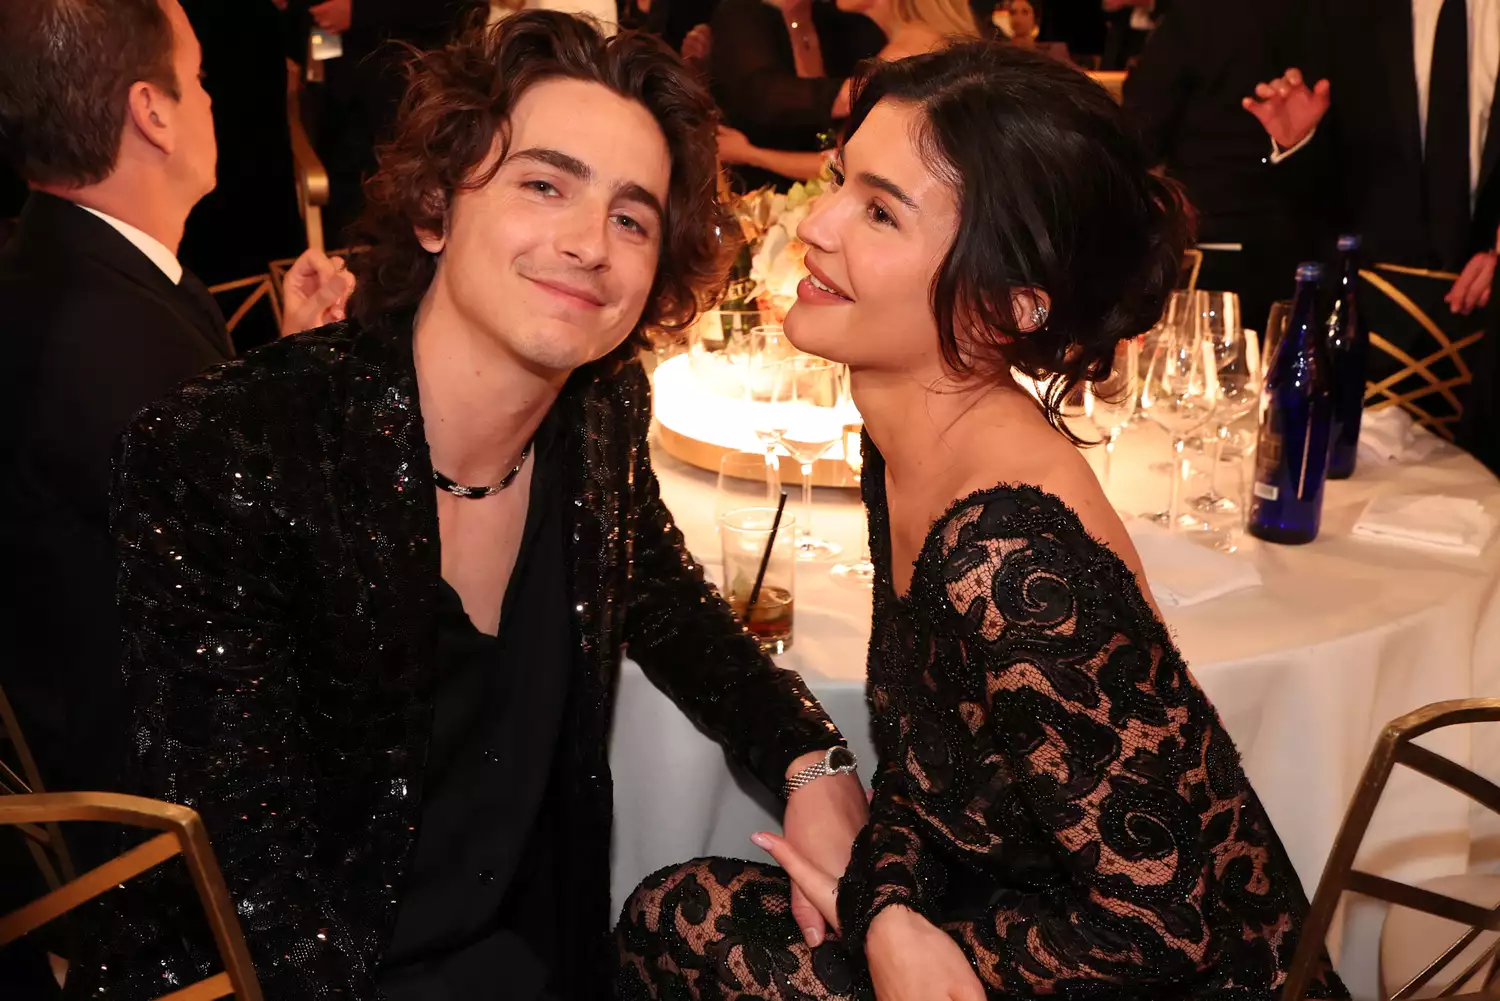 Timothée Chalamet And Kylie Jenner'S Romance Takes Center Stage Amidst A Night Of Glamour And Speculation 2